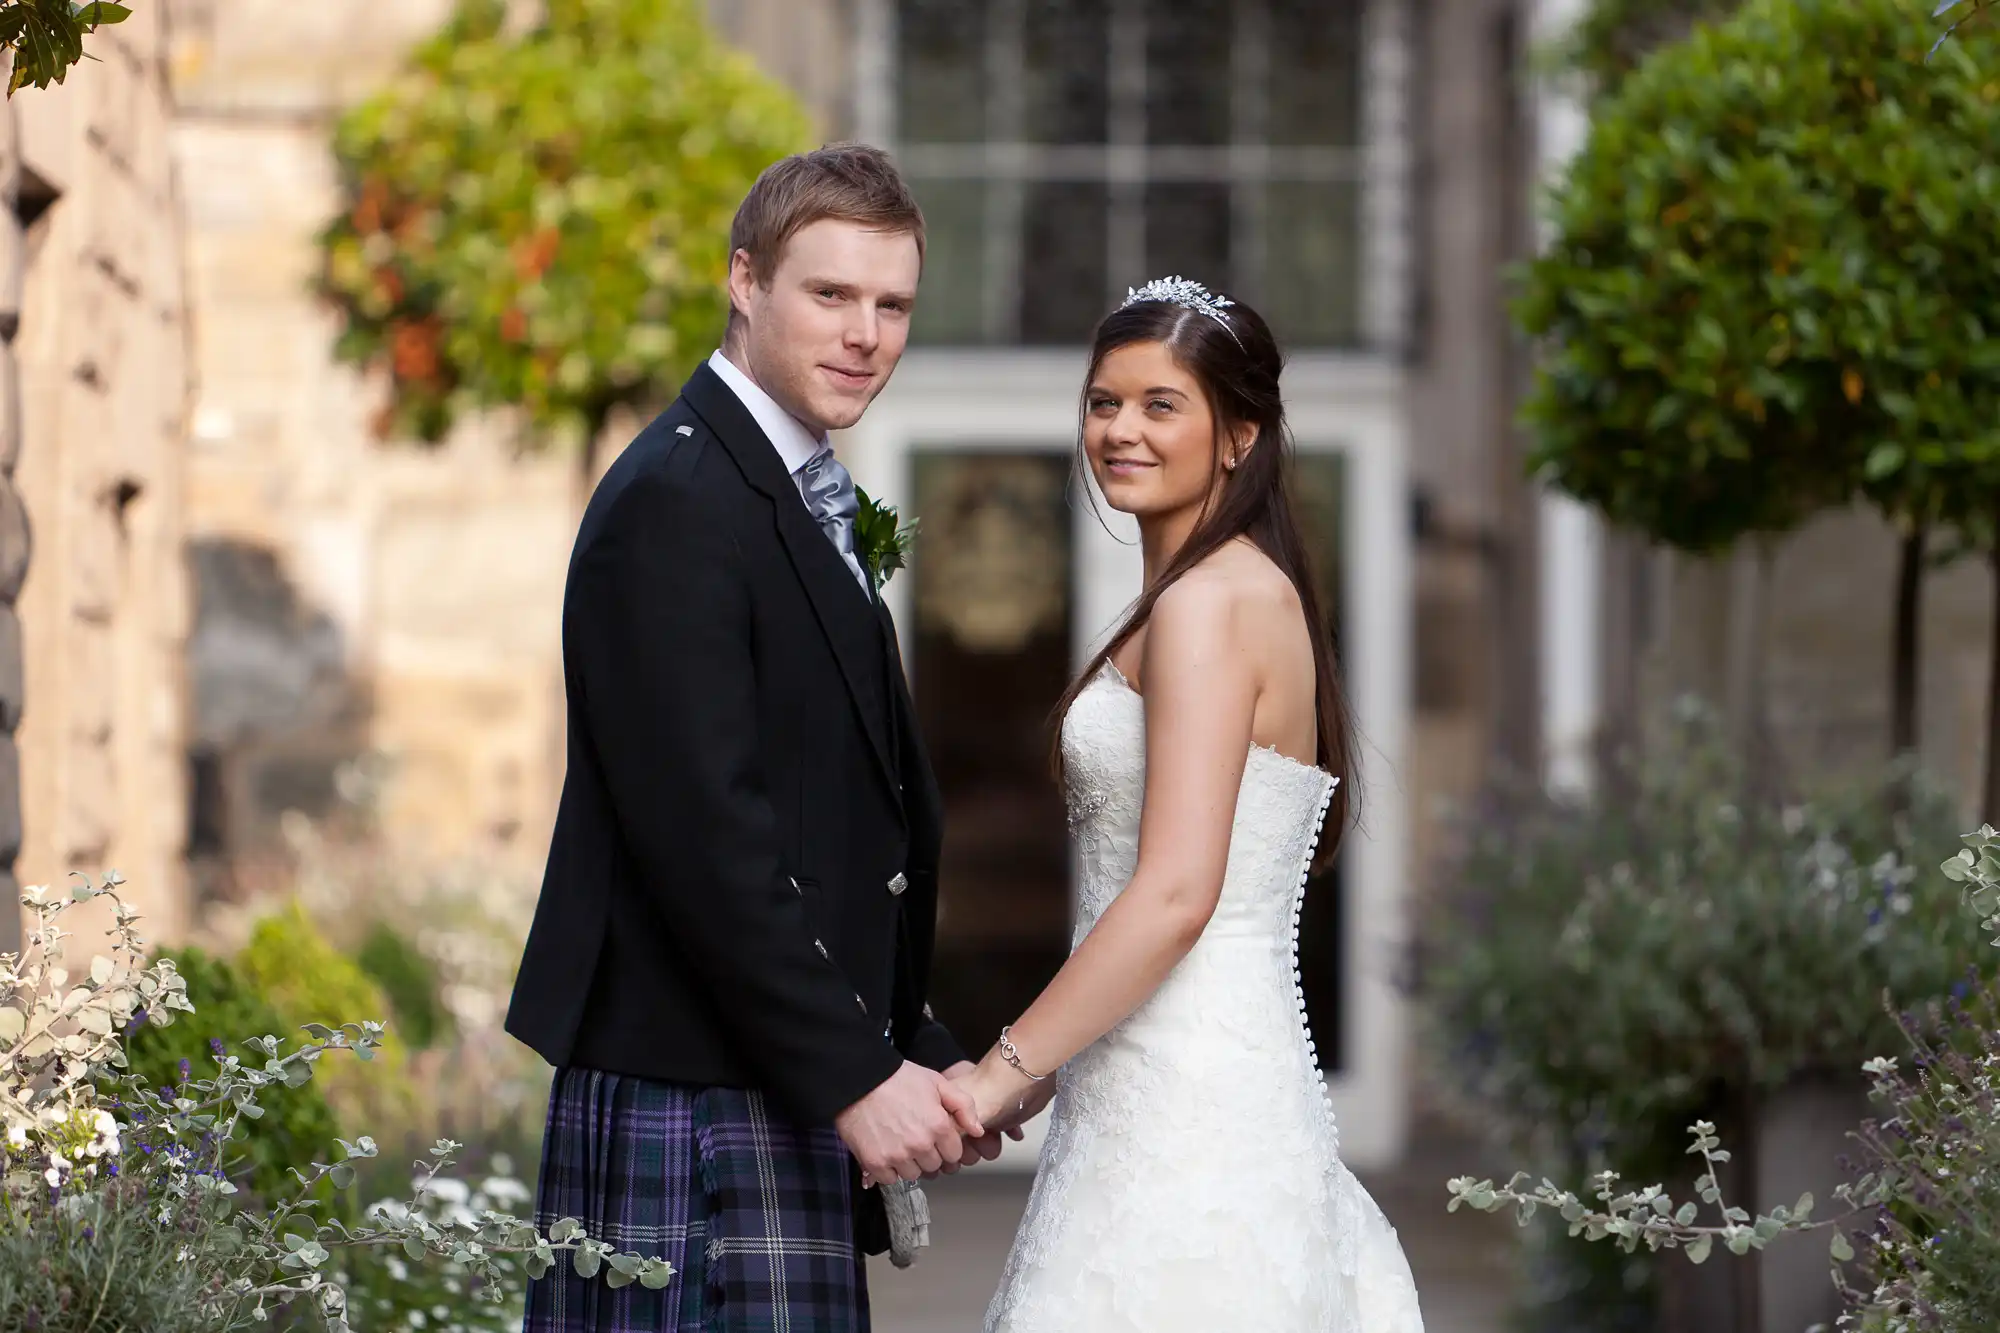 A bride and groom holding hands, with the groom in a kilt and the bride in a white dress, standing in a garden.